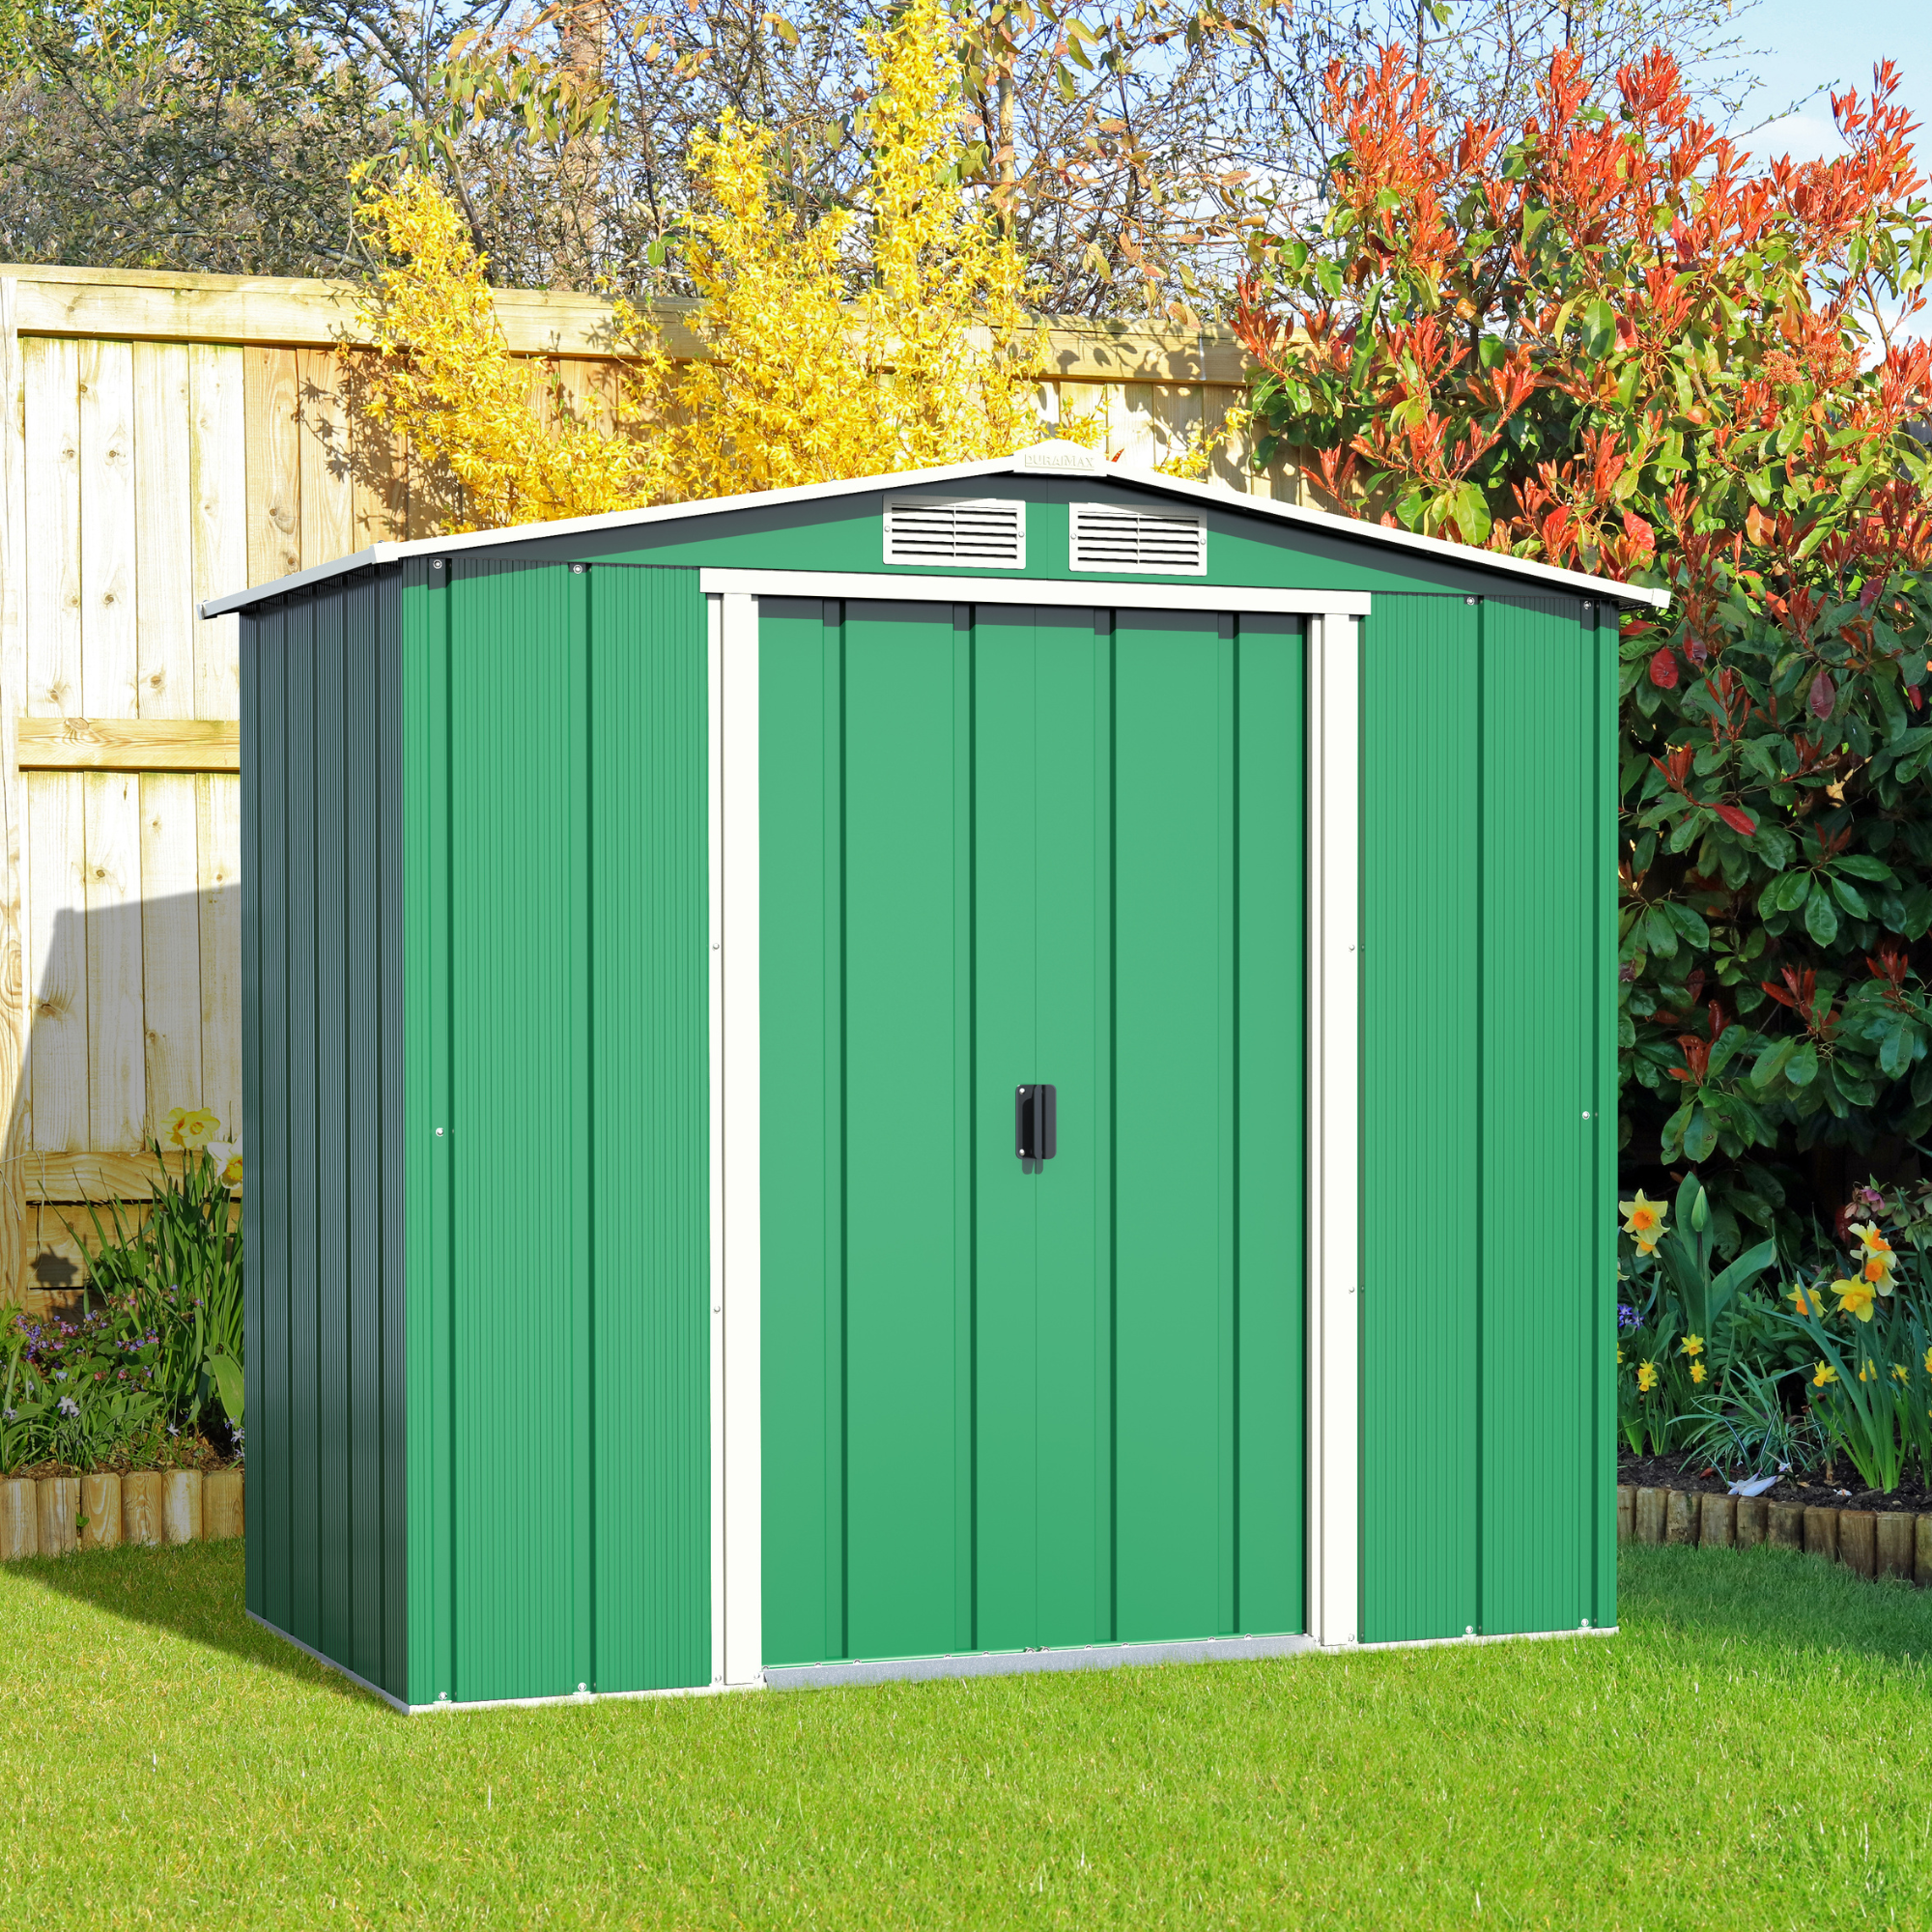 BillyOh Partner Eco Apex Roof Metal Shed - 6x4 Apex Eco - Duramax Eco Metal Shed